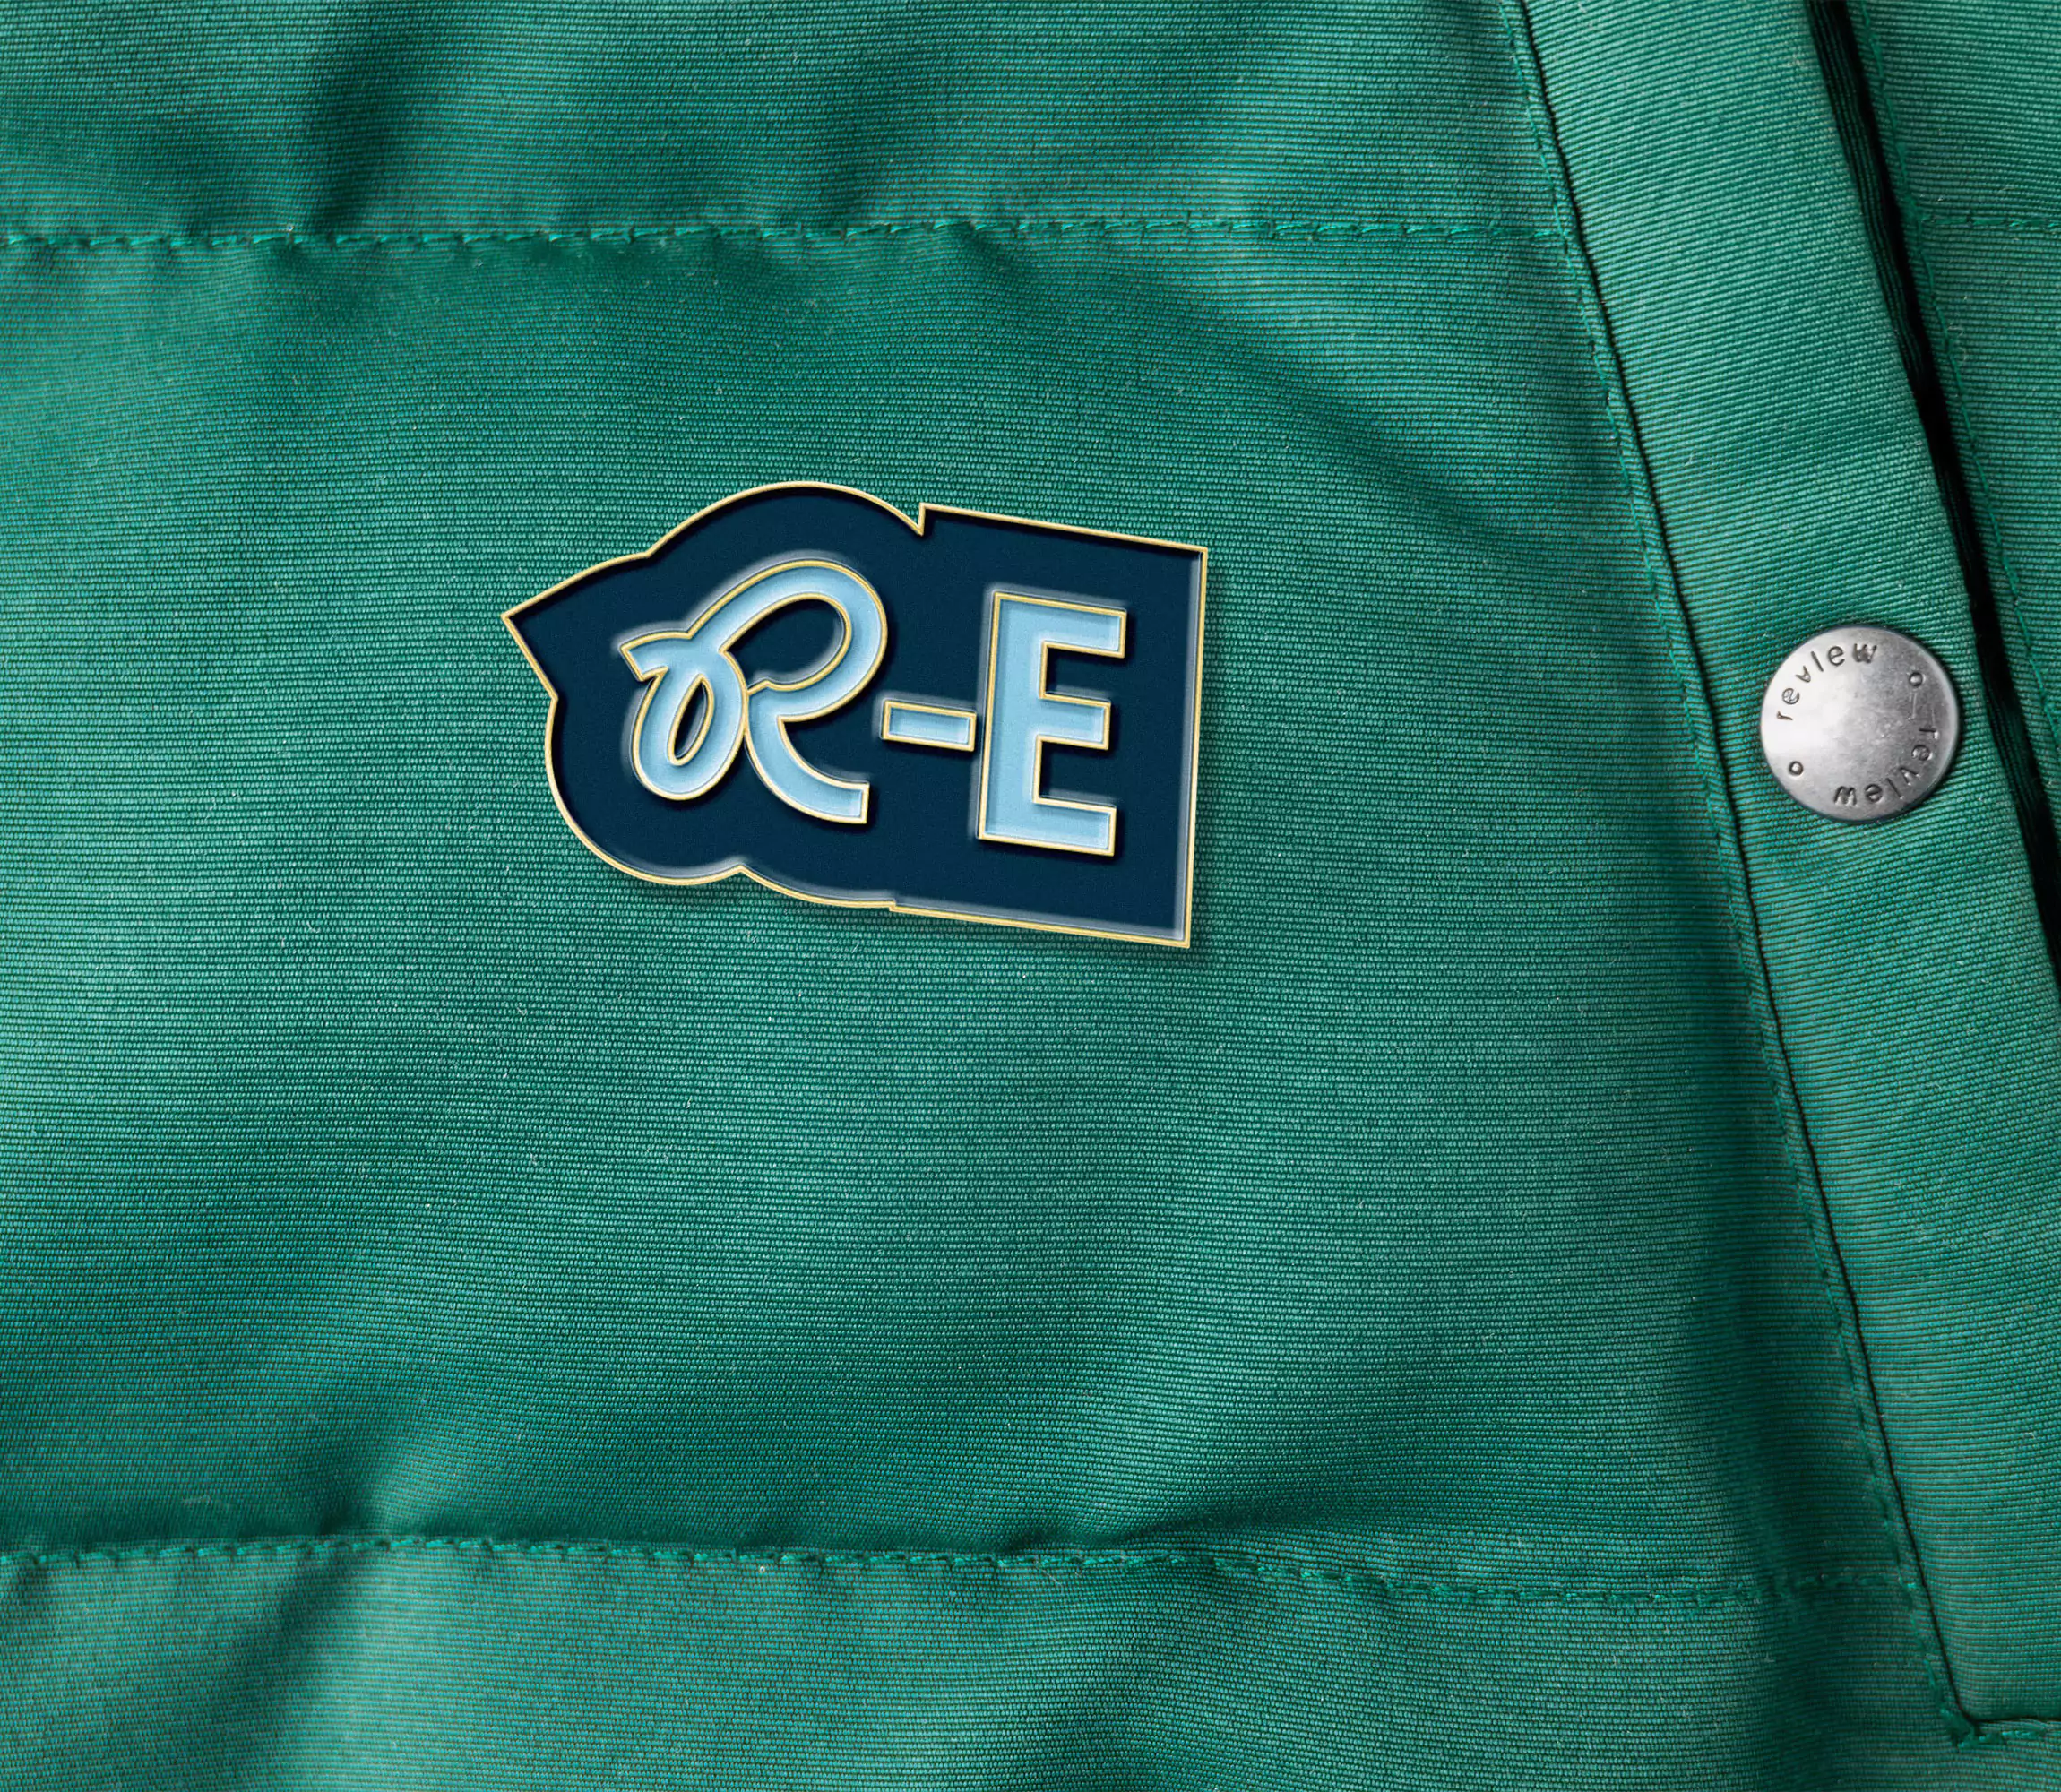 Visual Identity for Rethink Everything - Blue Pin in a Green Jacket